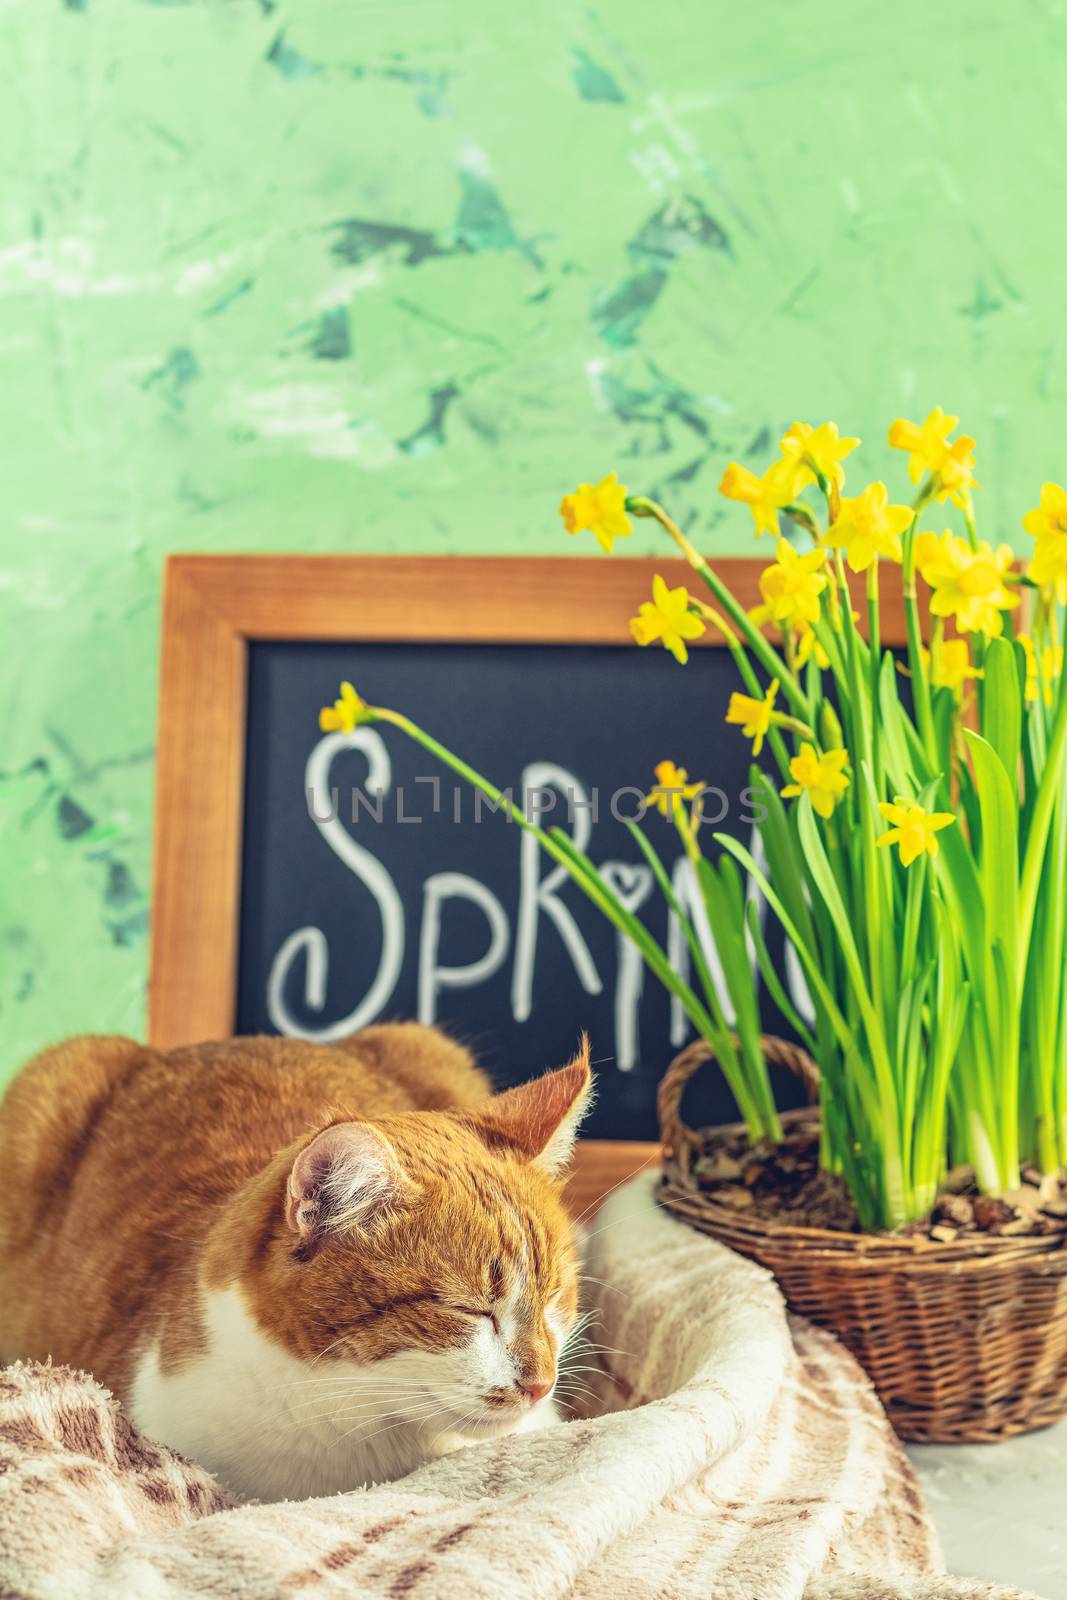 Spring cat coming concept background by ArtSvitlyna